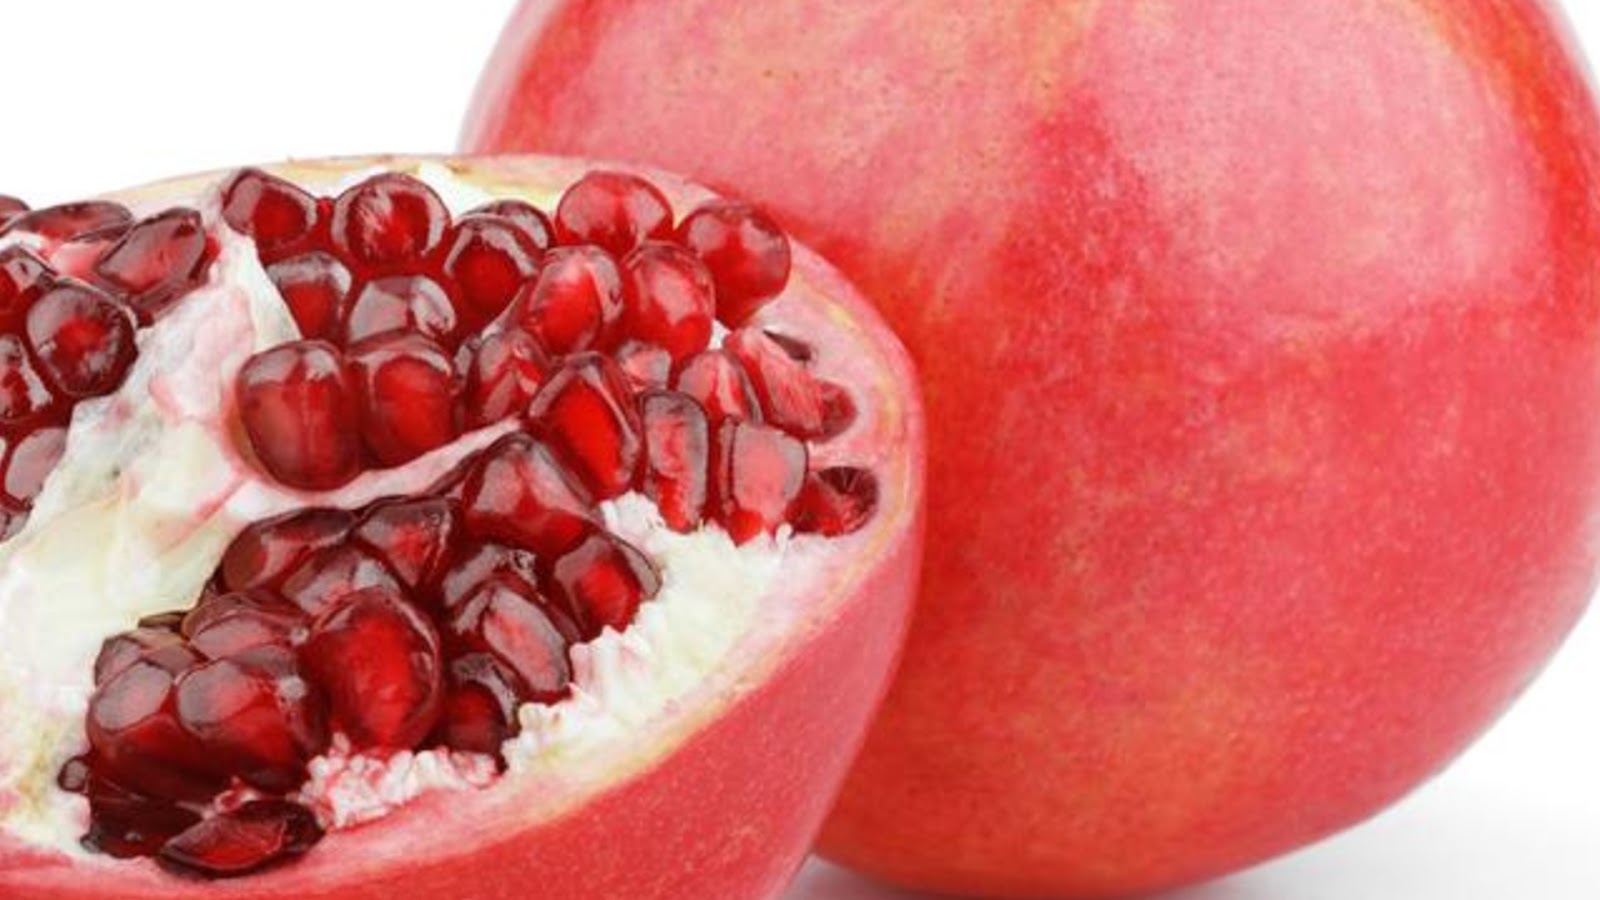 types of pomegranate